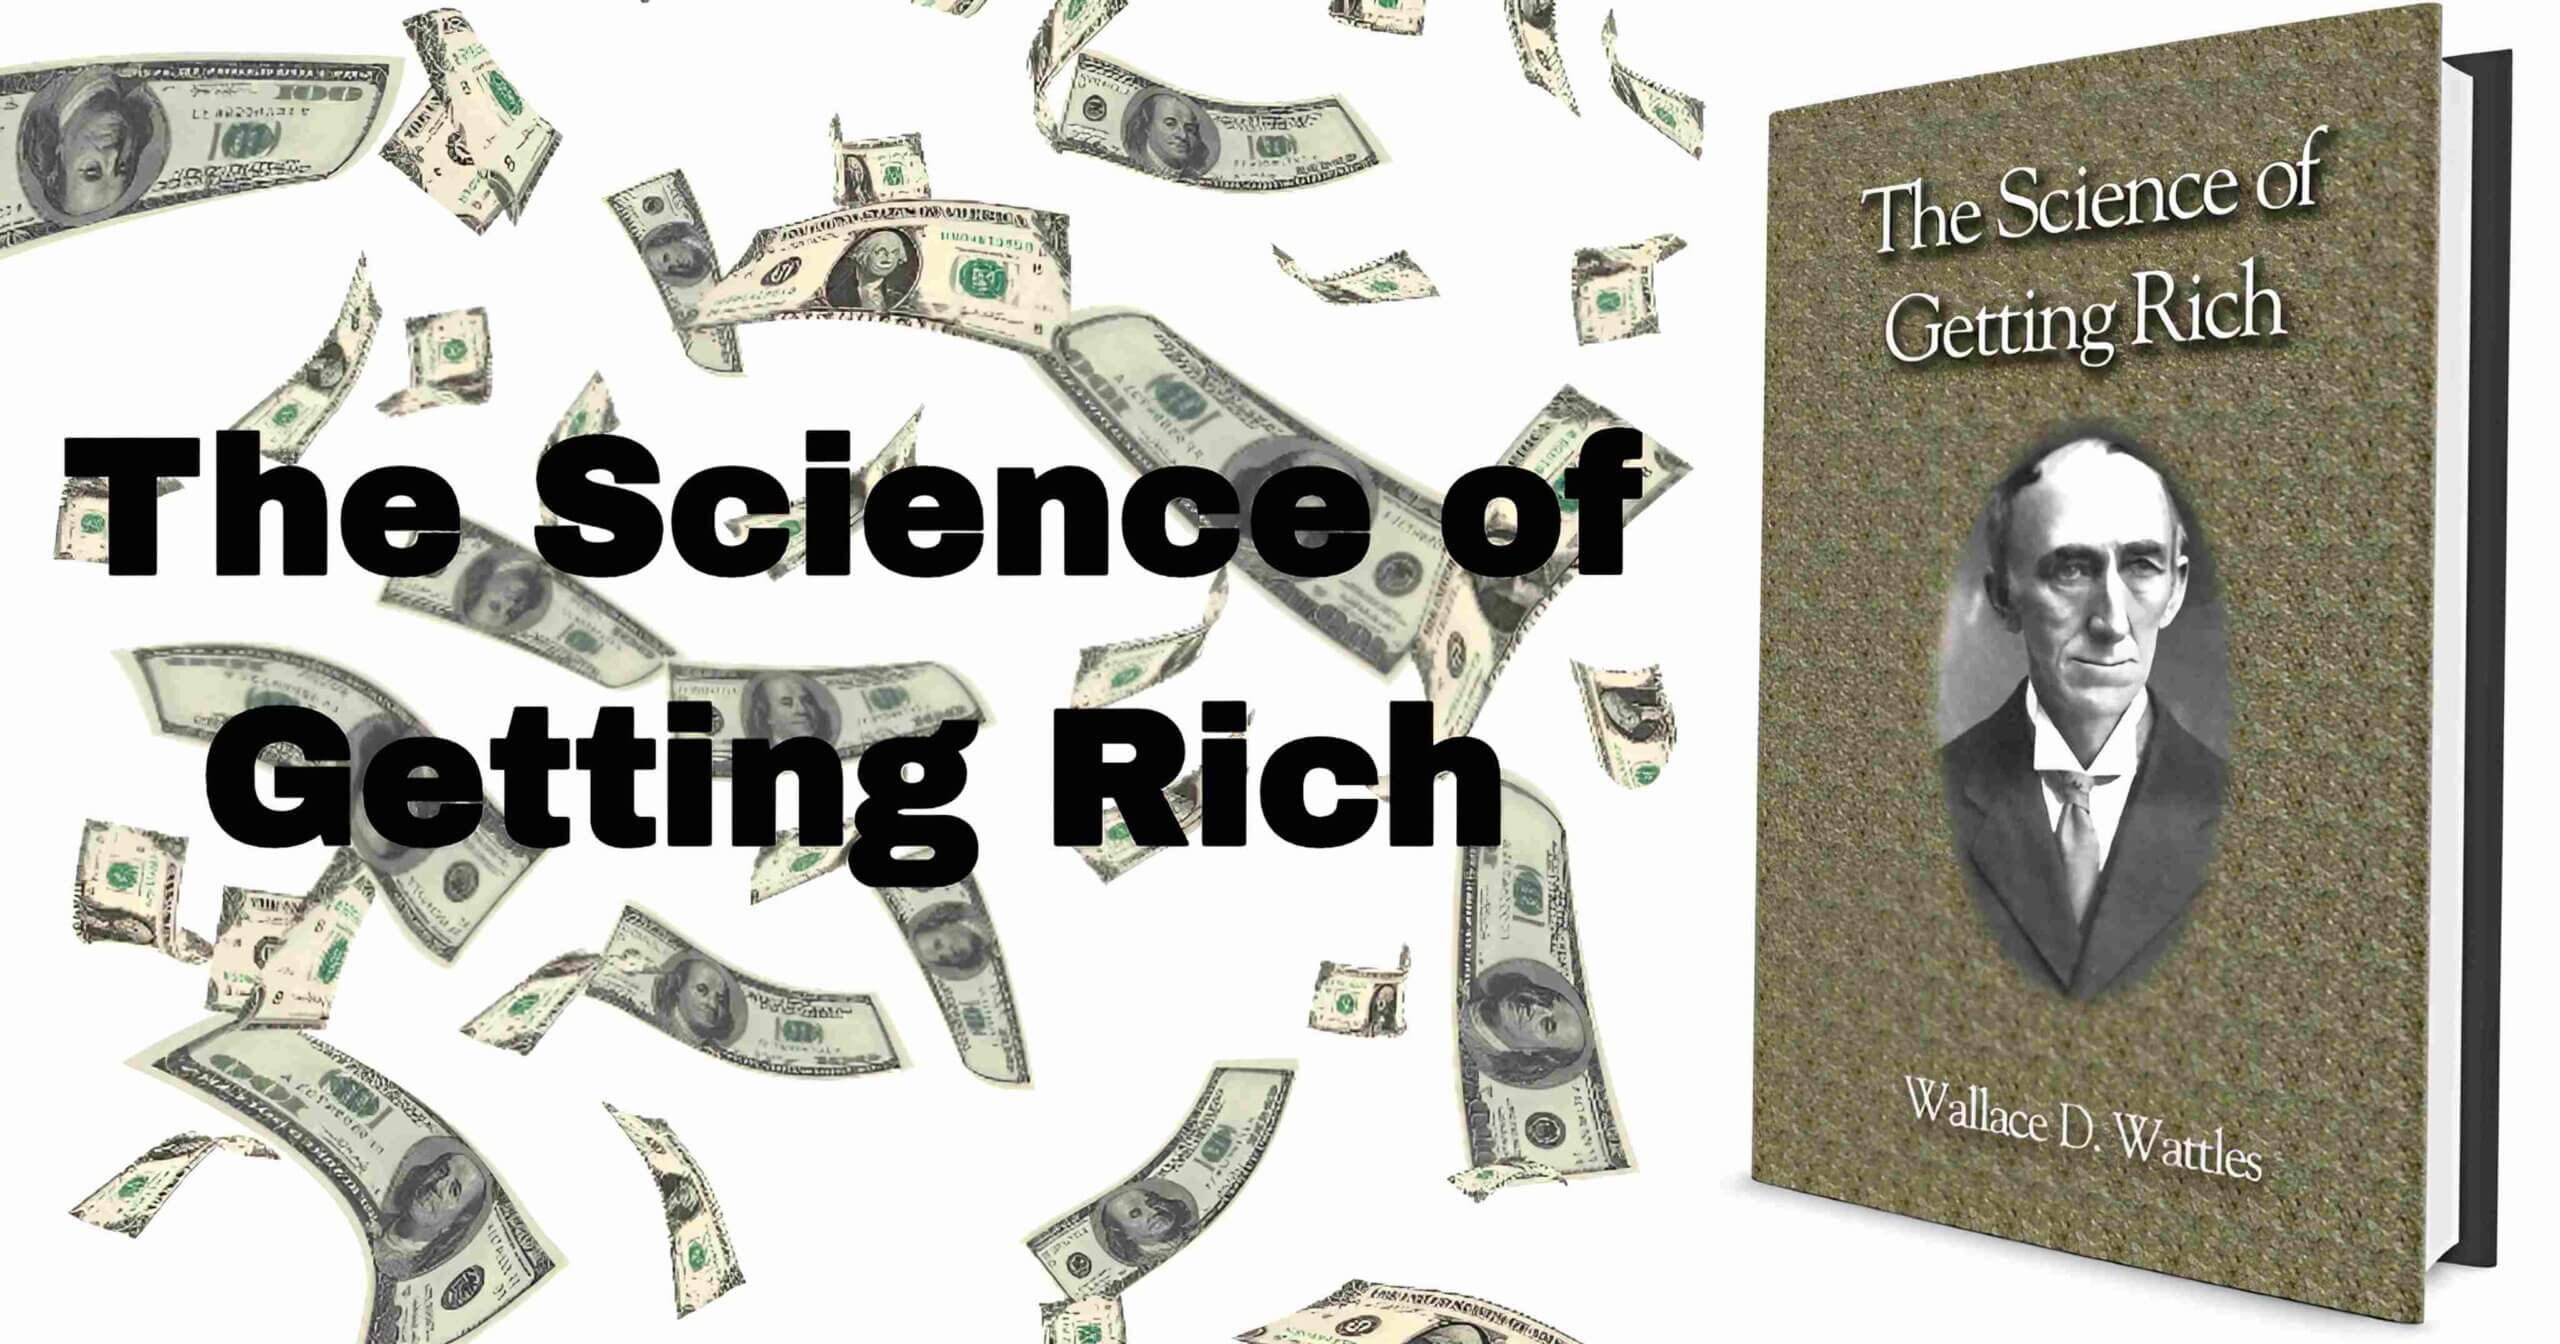 The Science of Getting Rich: Book Summary Marathi